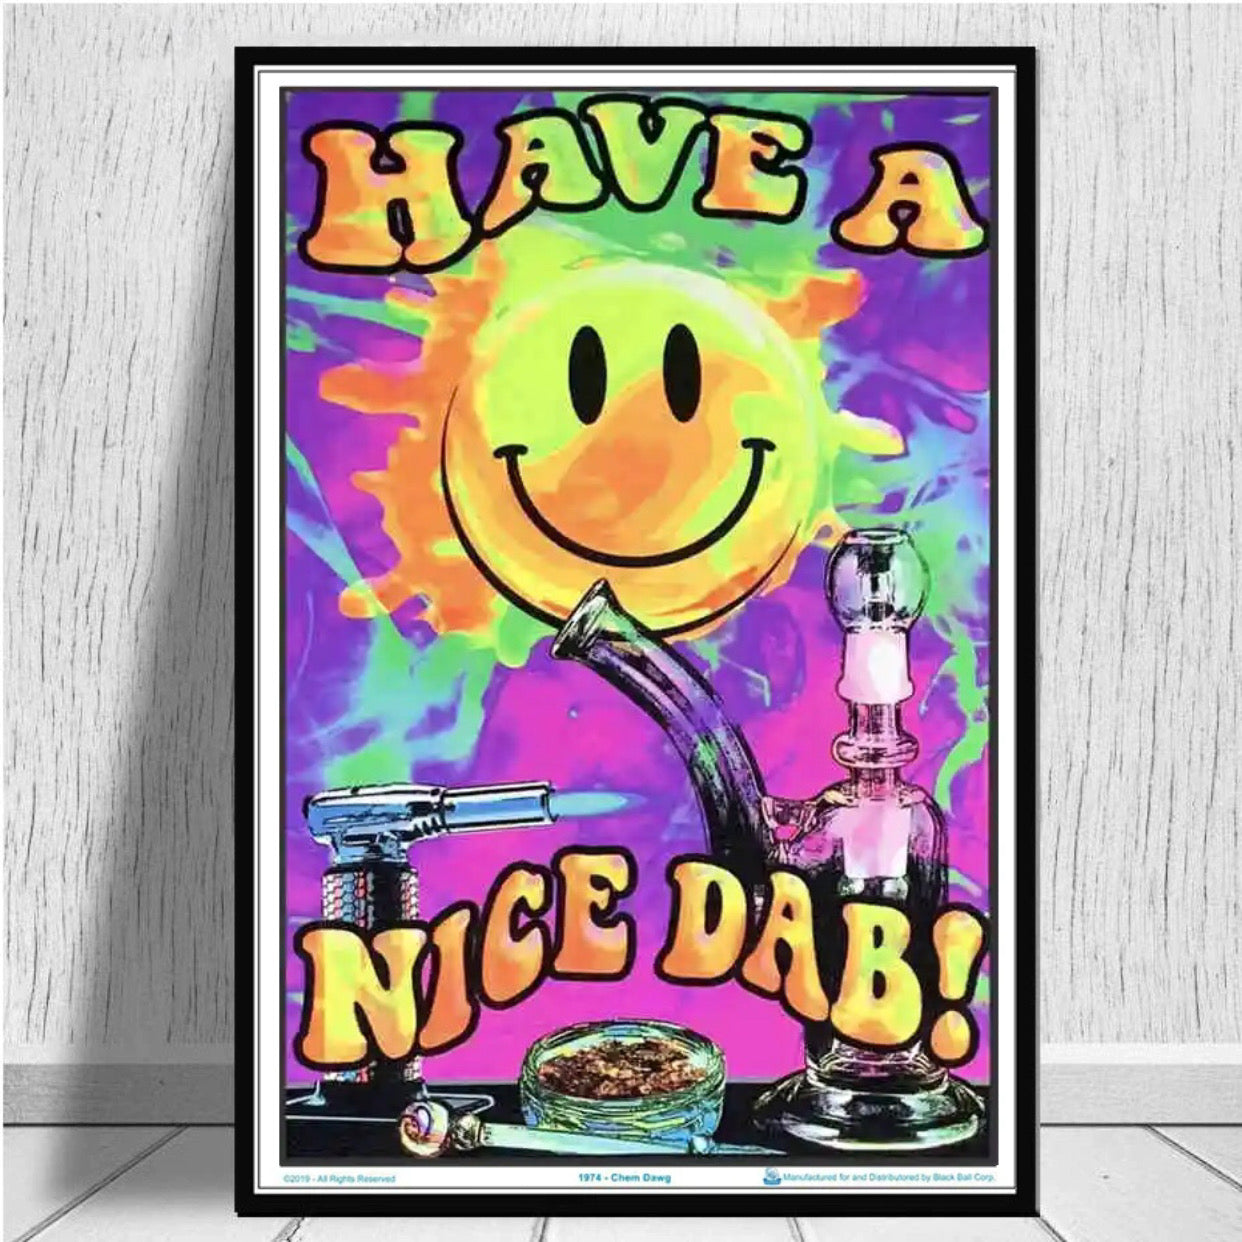 " have a nice dab" poster